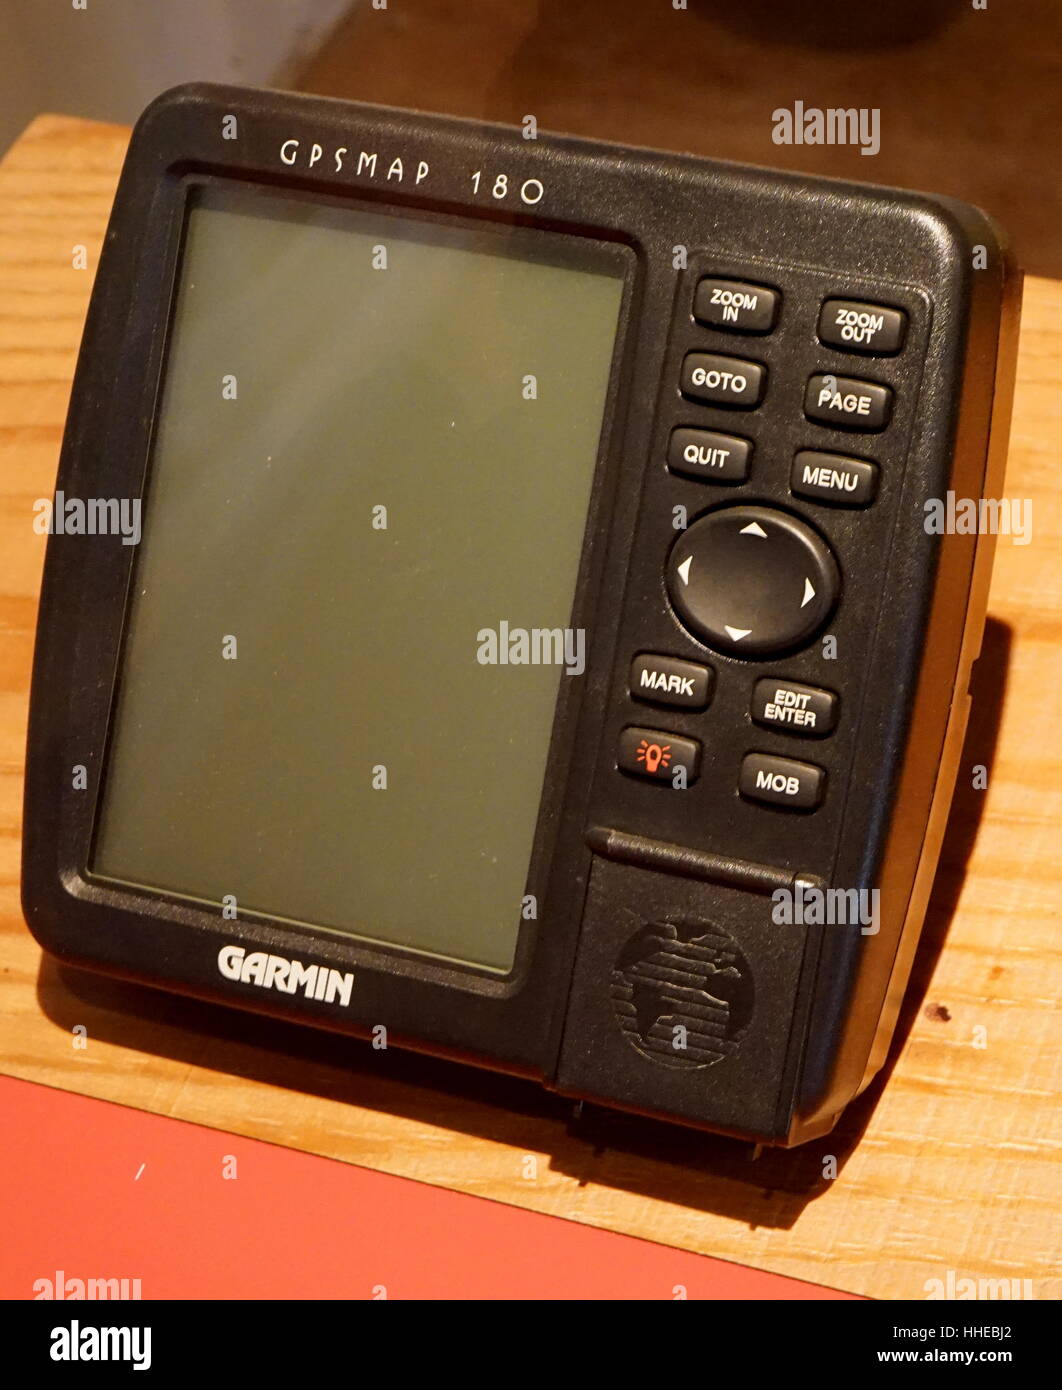 Marine GPS navigation device circa 1990. Global System (GPS) is a space-based navigation system that provides location and time information in all weather conditions, anywhere on or near the Earth